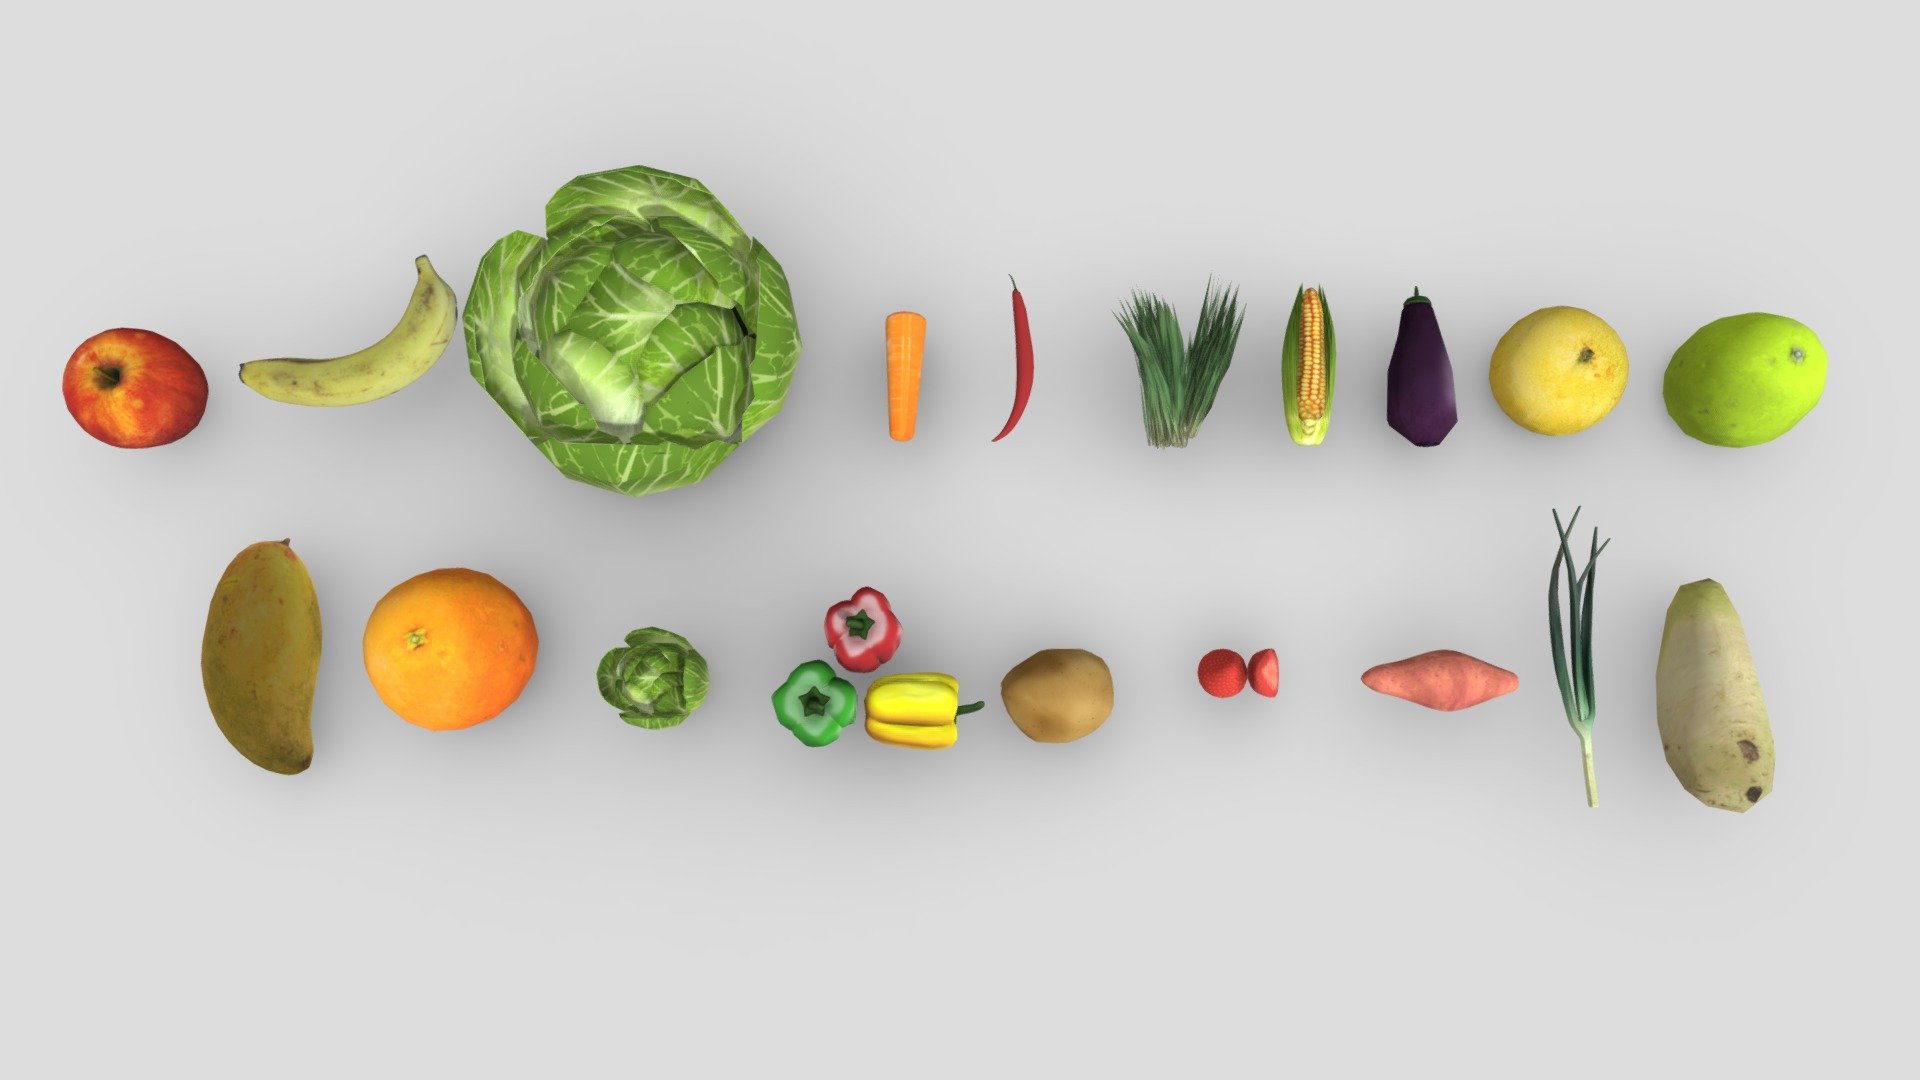 Hi.
We make a set for webtoons with sketchup.

But you can use it anywhere else.

-

This is &ldquo;lowpoly Fruit&amp;vegetable pack &ldquo;

The components are:

apple_01

banana_01

cabbage_01

carrot_01

chili_01

chives_01

corn_01

eggplant

grapefruit_01

lime_01

mango_01

orange_01

pakchoi_01

paprika_01

potato_01

strawberry_01

sweetpotato_01

welshonion_01

whiteradish_01

including : fbx,jpg,blender

I hope you use it well 3d model